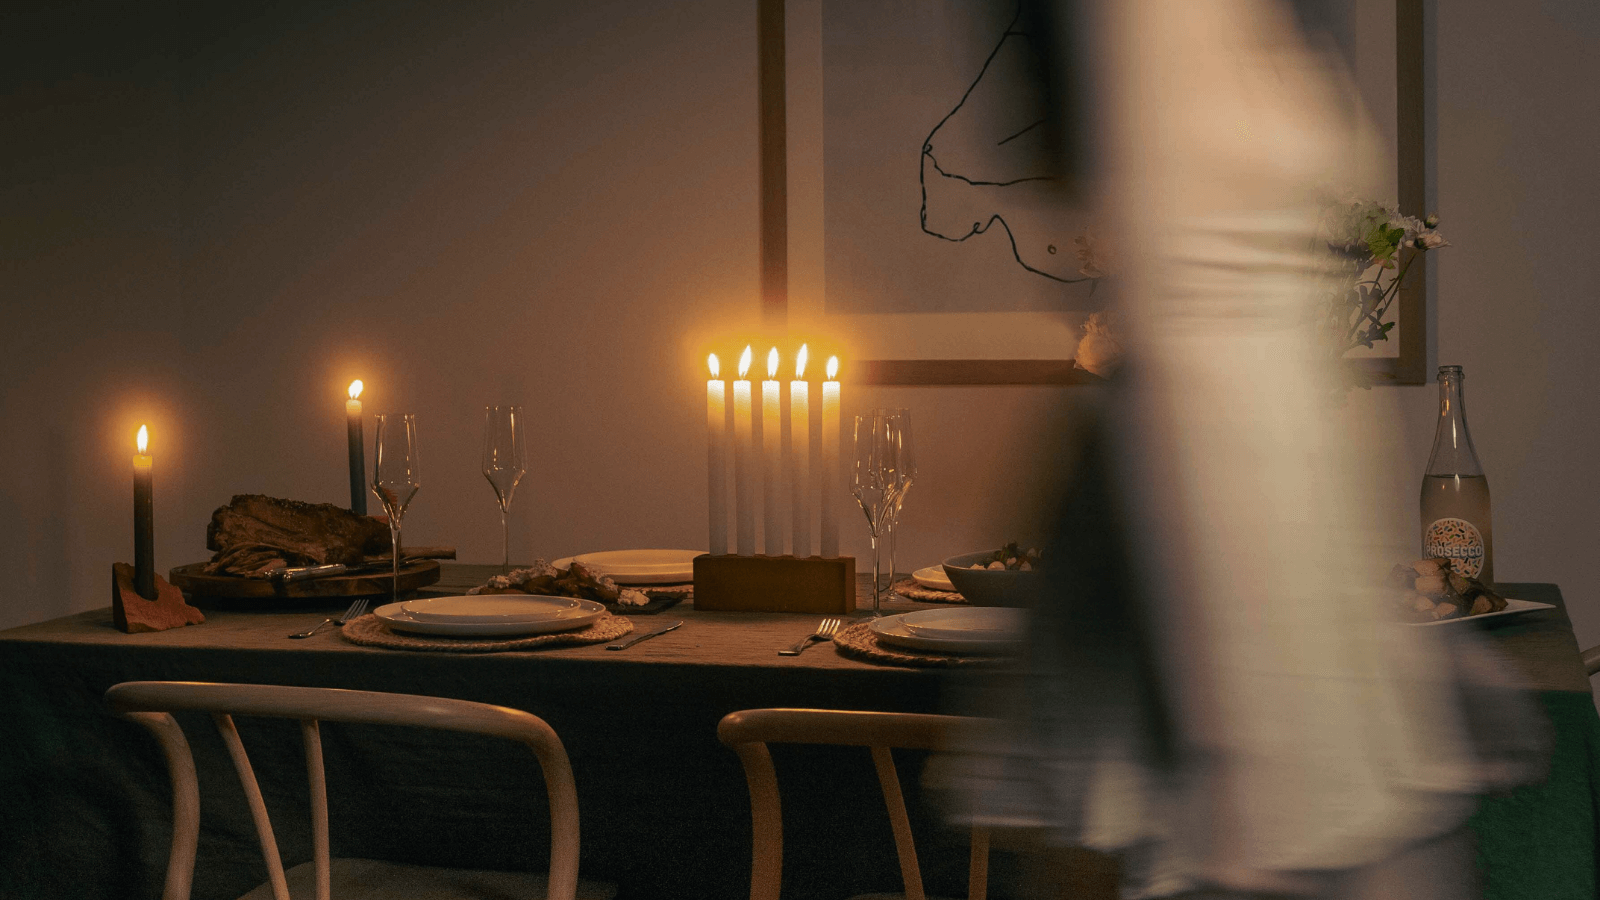 A dimly lit dinner party scene featuring a table setting for 4 people, including placemats, plates, wine glasses and cutlery. On the middle of the table sits The Centrepiece recycled brick candle holder which houses 5 lit white candle sticks. 2 lit recycled brick The Shard Candle Holders are also on the table. A woman has walked across the foreground of the photo and is blurry due to the photographs long exposure time. 